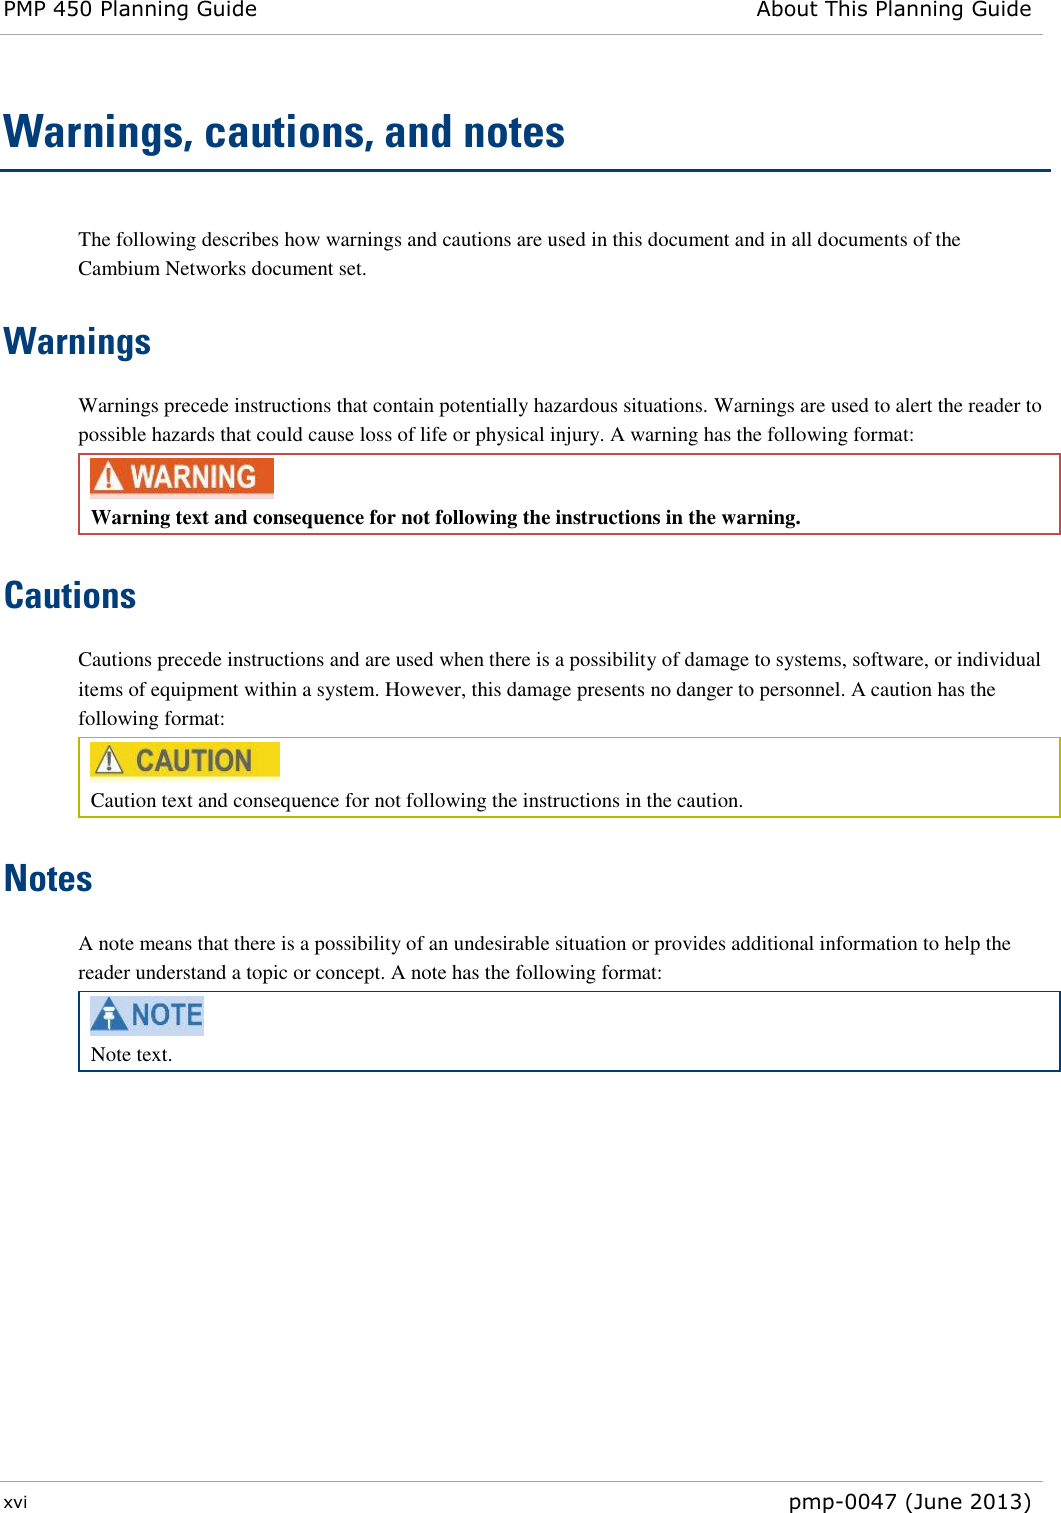 PMP 450 Planning Guide About This Planning Guide  xvi  pmp-0047 (June 2013)  Warnings, cautions, and notes The following describes how warnings and cautions are used in this document and in all documents of the Cambium Networks document set. Warnings Warnings precede instructions that contain potentially hazardous situations. Warnings are used to alert the reader to possible hazards that could cause loss of life or physical injury. A warning has the following format:  Warning text and consequence for not following the instructions in the warning. Cautions Cautions precede instructions and are used when there is a possibility of damage to systems, software, or individual items of equipment within a system. However, this damage presents no danger to personnel. A caution has the following format:  Caution text and consequence for not following the instructions in the caution. Notes A note means that there is a possibility of an undesirable situation or provides additional information to help the reader understand a topic or concept. A note has the following format:  Note text.     